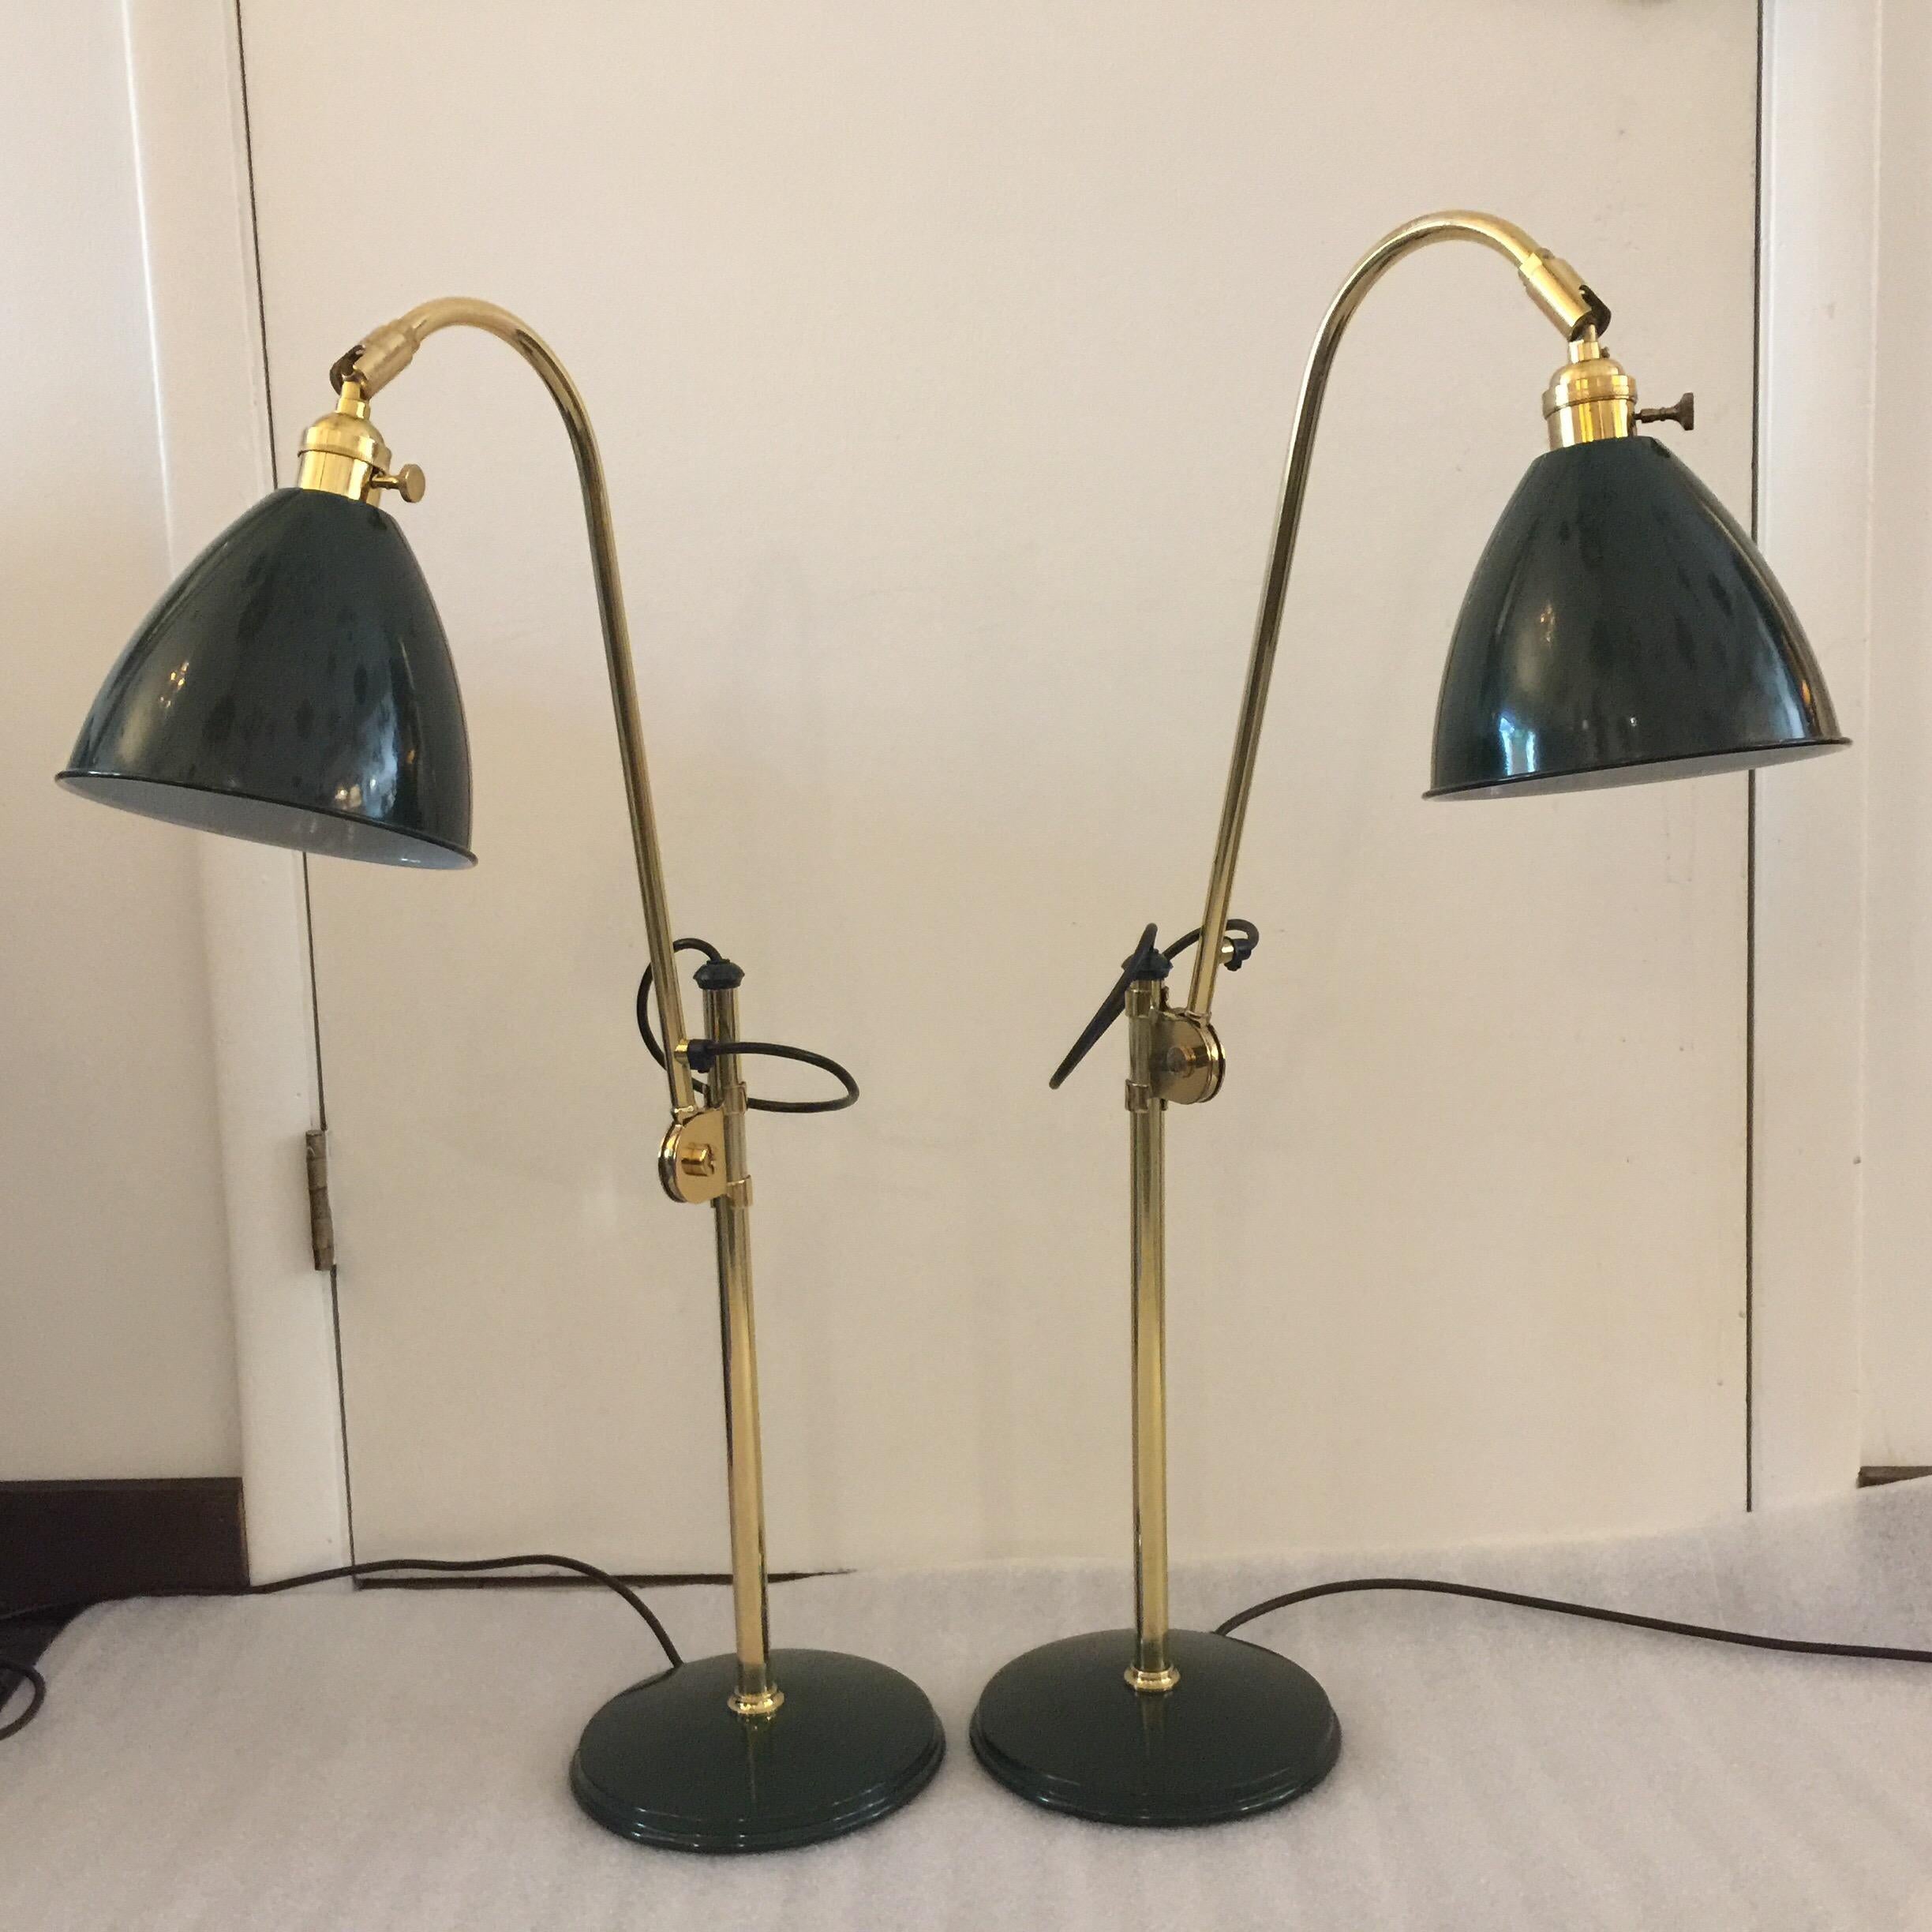 OMI lamps evolved from the desire to create lighting that is timeless, playful and quietly opulent. Bold but sleek, this Mid-Century Modern desk lamp is constructed of brass and boasts a gooseneck-style stem. Fully adjustable, this eye-catching lamp